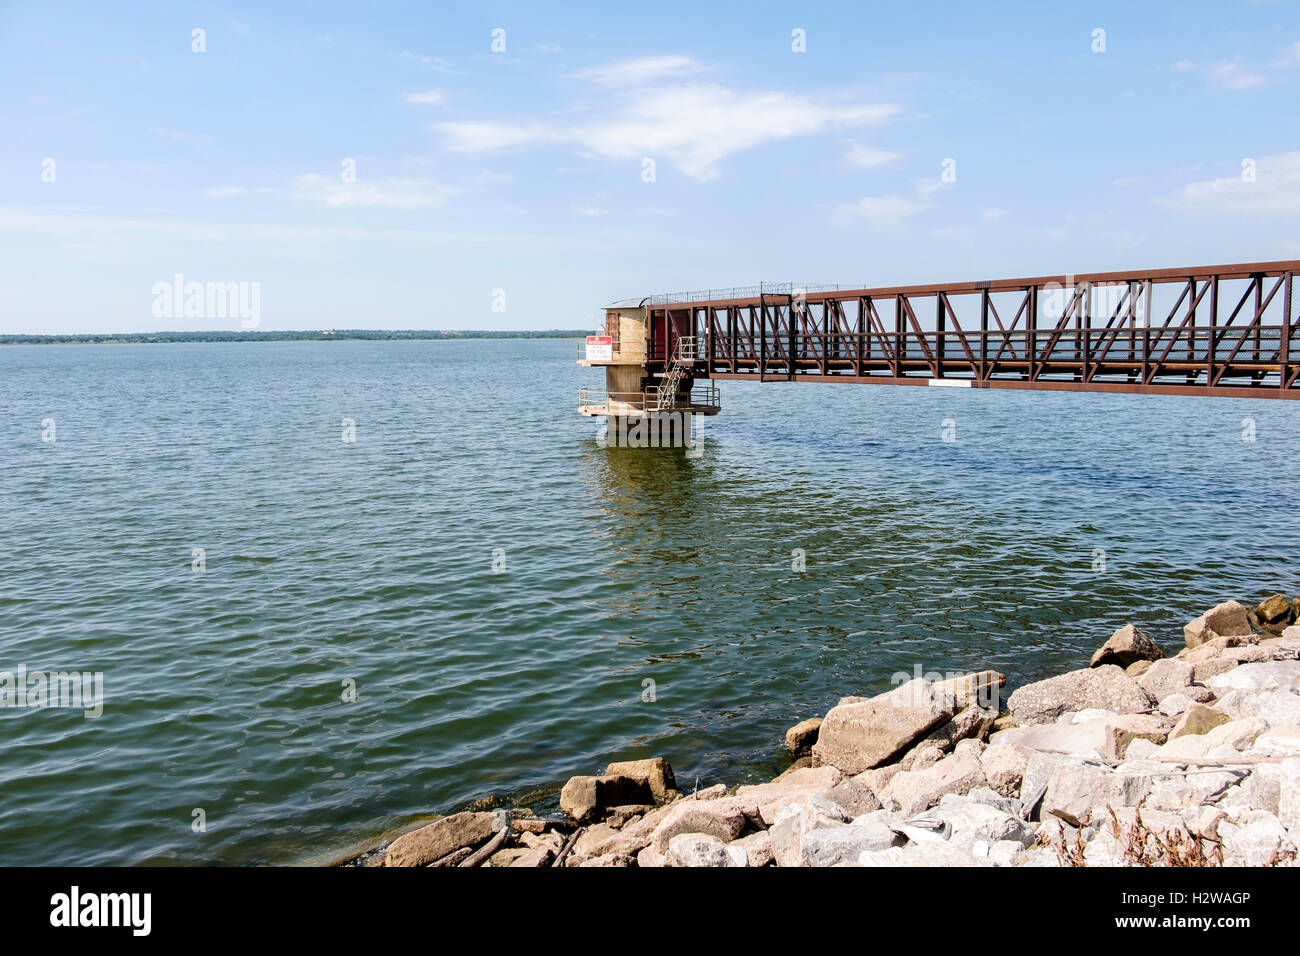 An intake tower in Hefner lake, a municpal water supply for Oklahoma City, Oklahoma, USA. Stock Photo